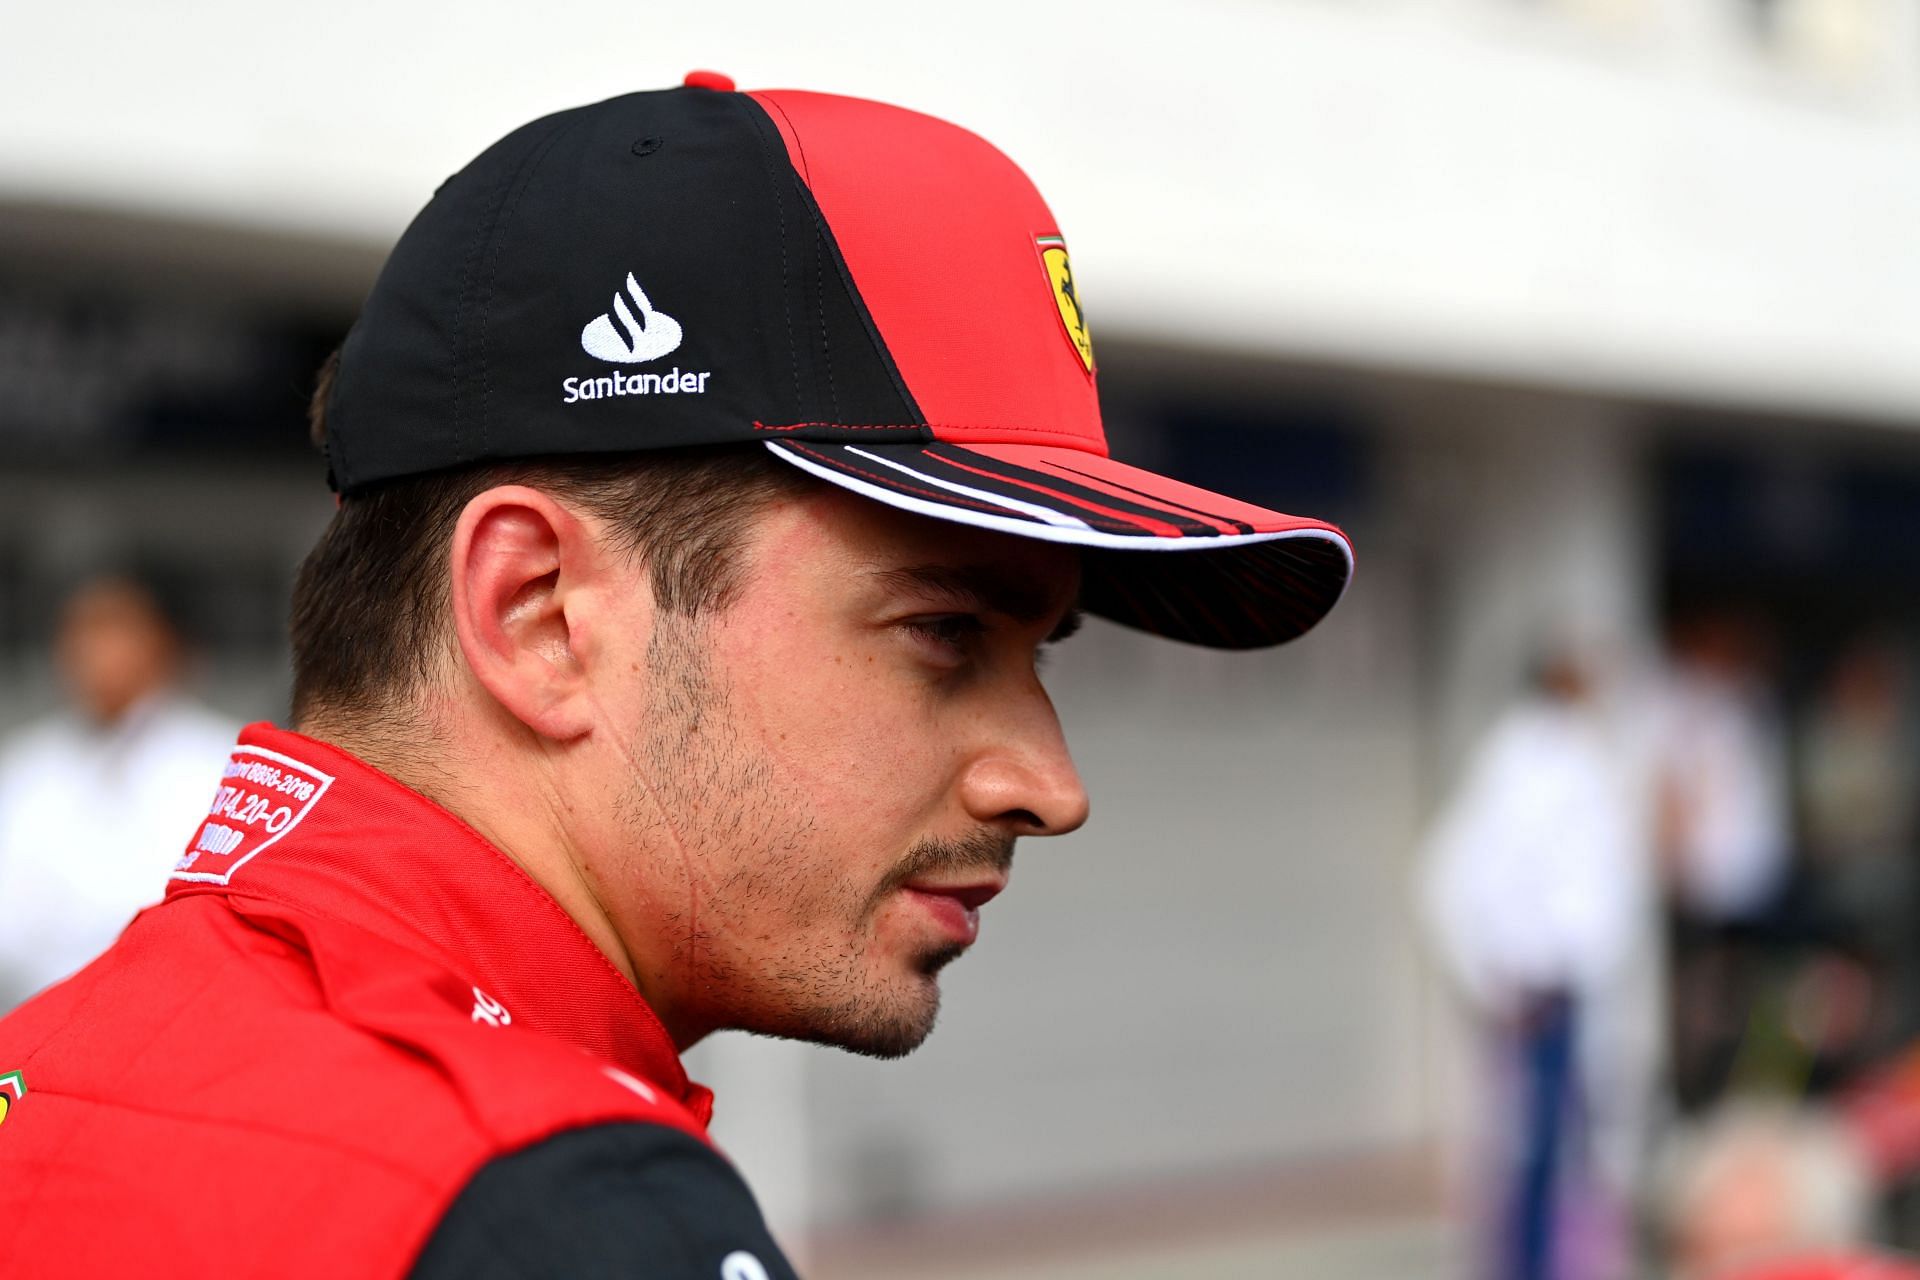 F1 Grand Prix of Hungary - Qualifying - Charles Leclerc in Hungary.